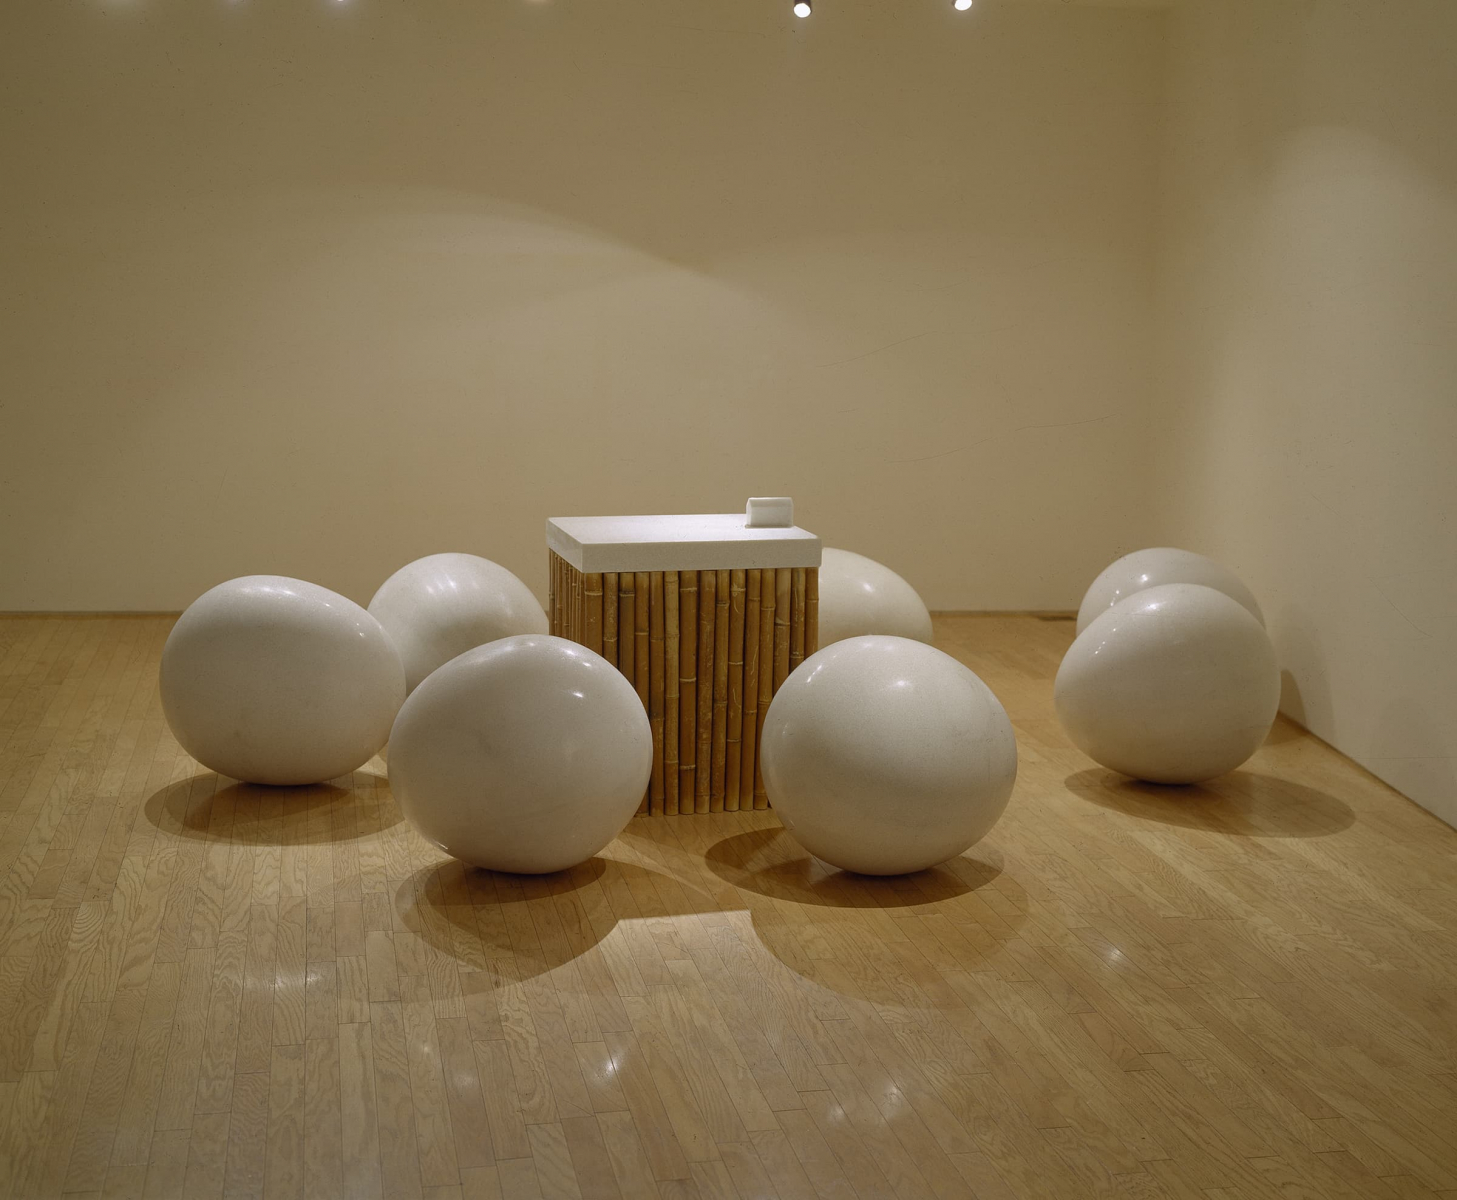 1997, Lee Kang So, From an Island-97131, Marble, Bamboo, 130x700x900cm